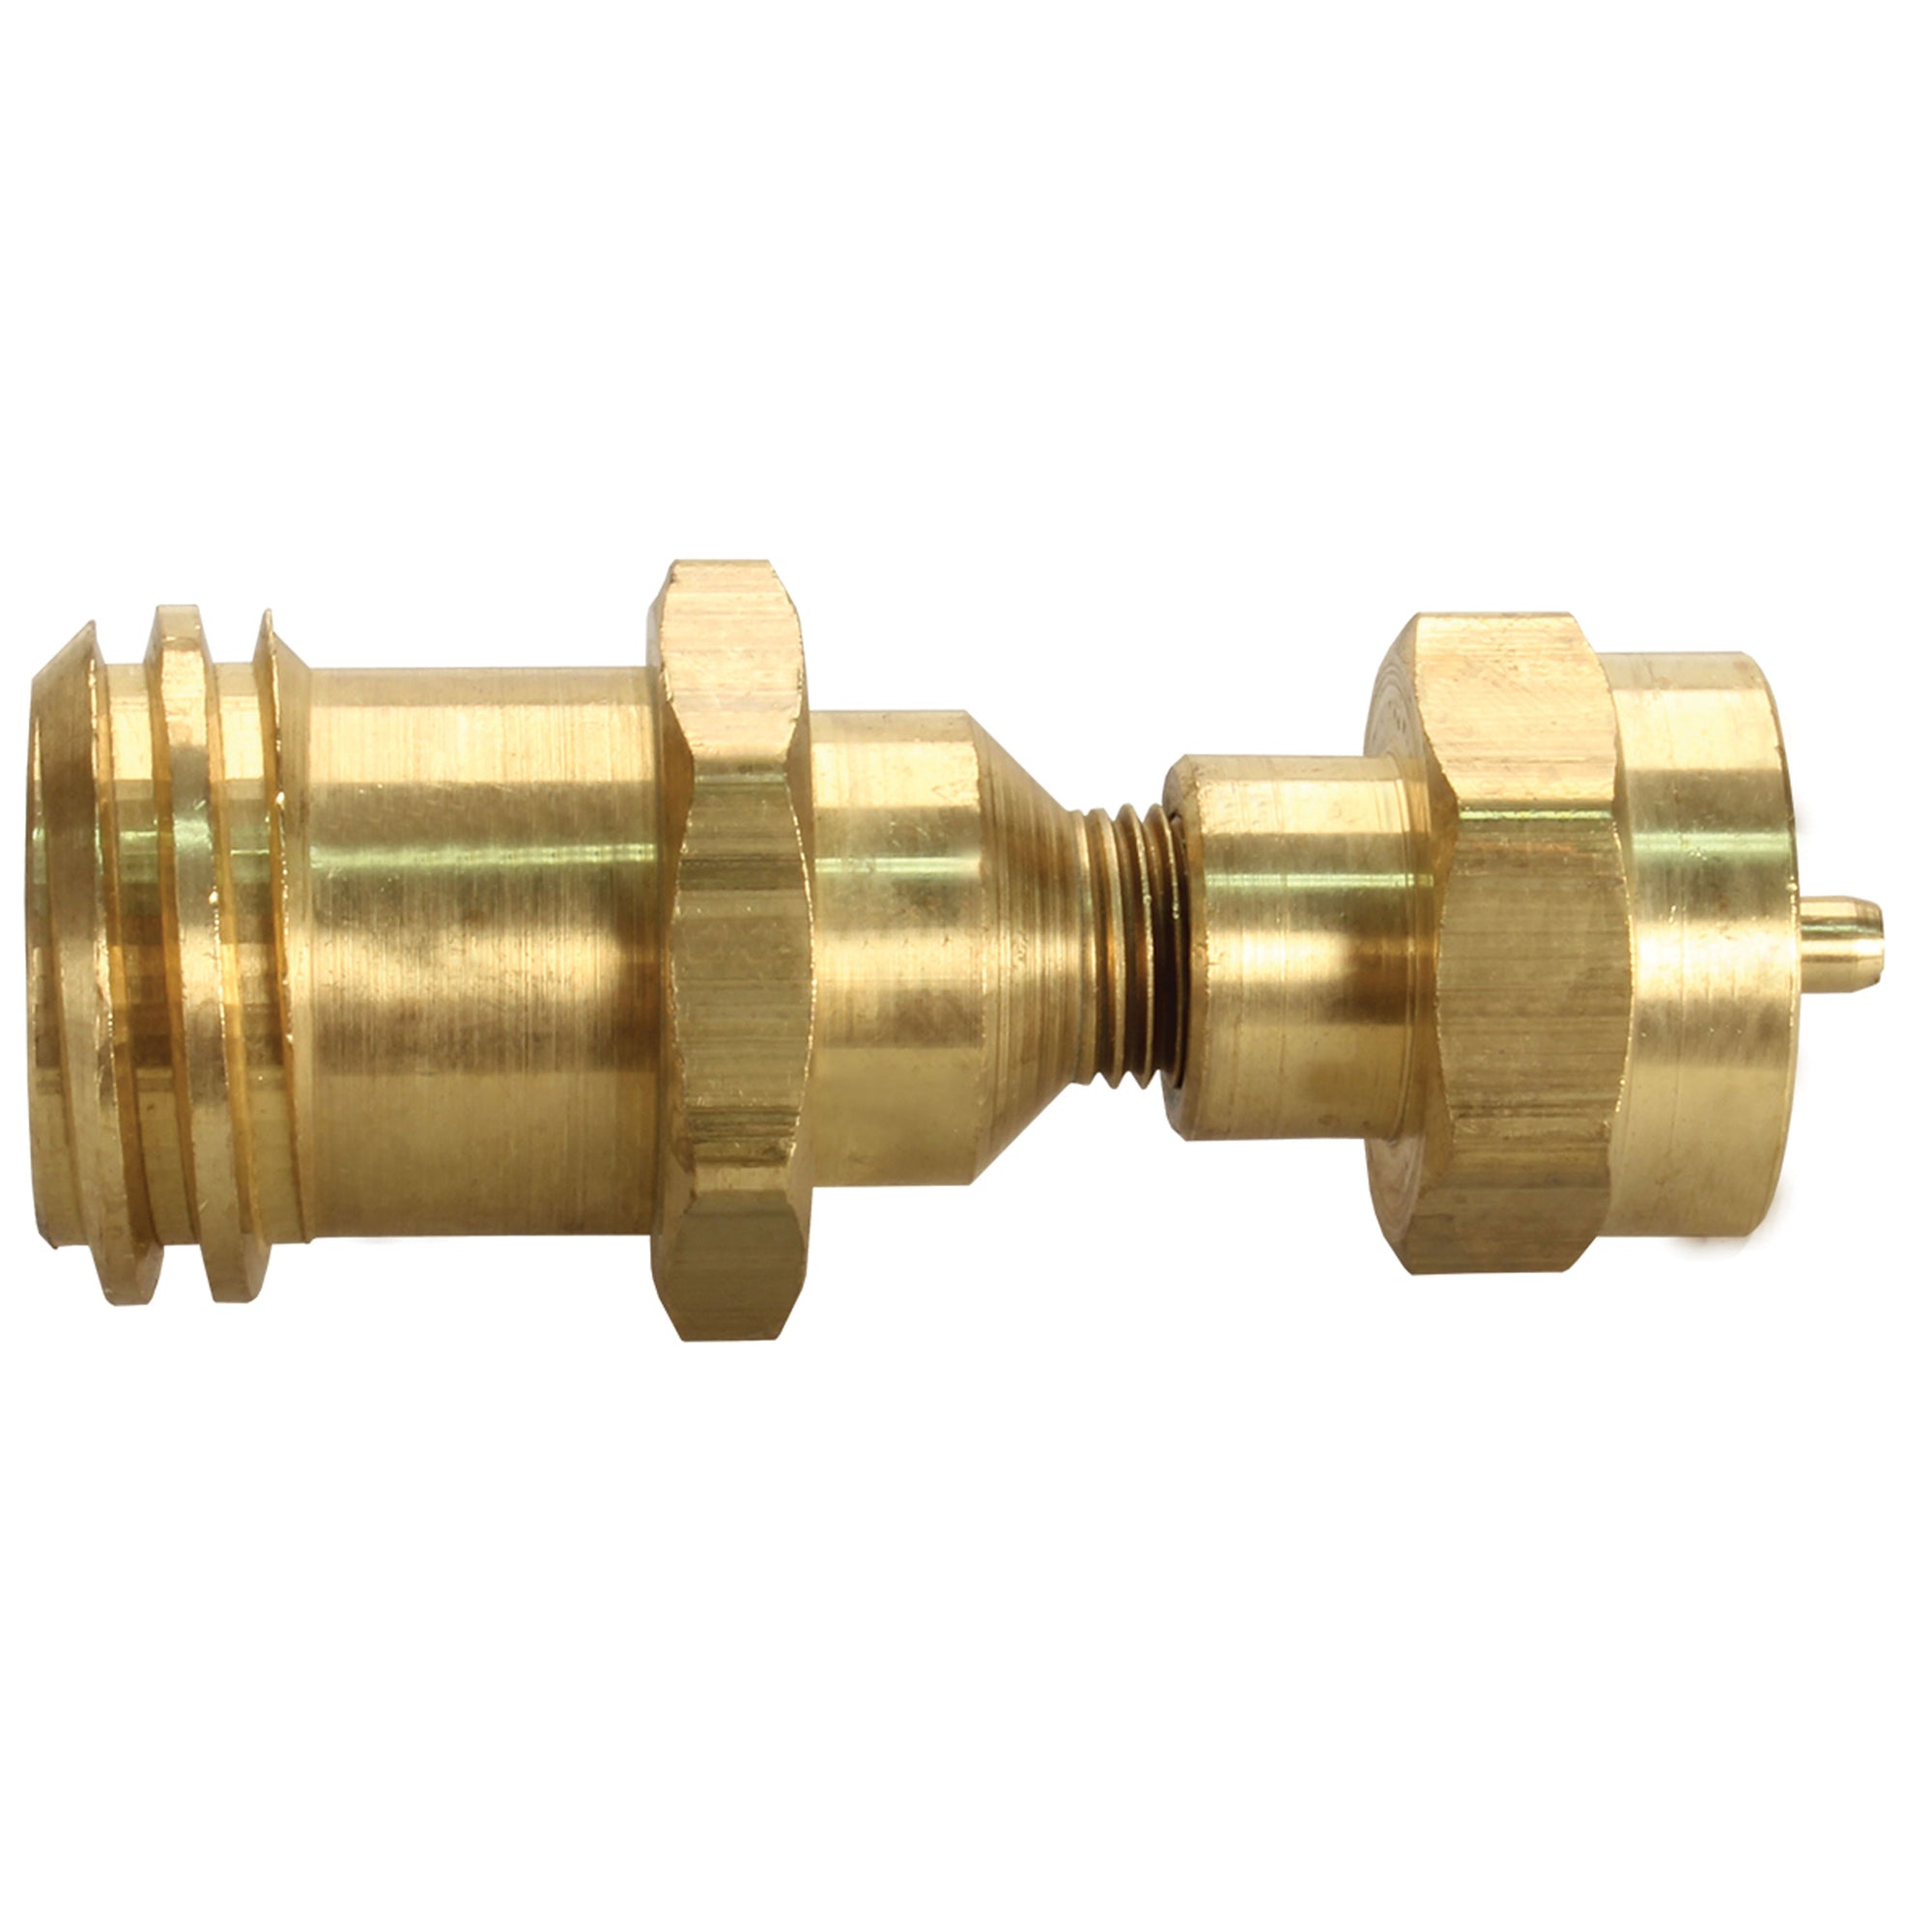 JR Products 07-30205 Emergency Cylinder Adapter - 1"-20 Female Cylinder Thread x Male Quick Connect